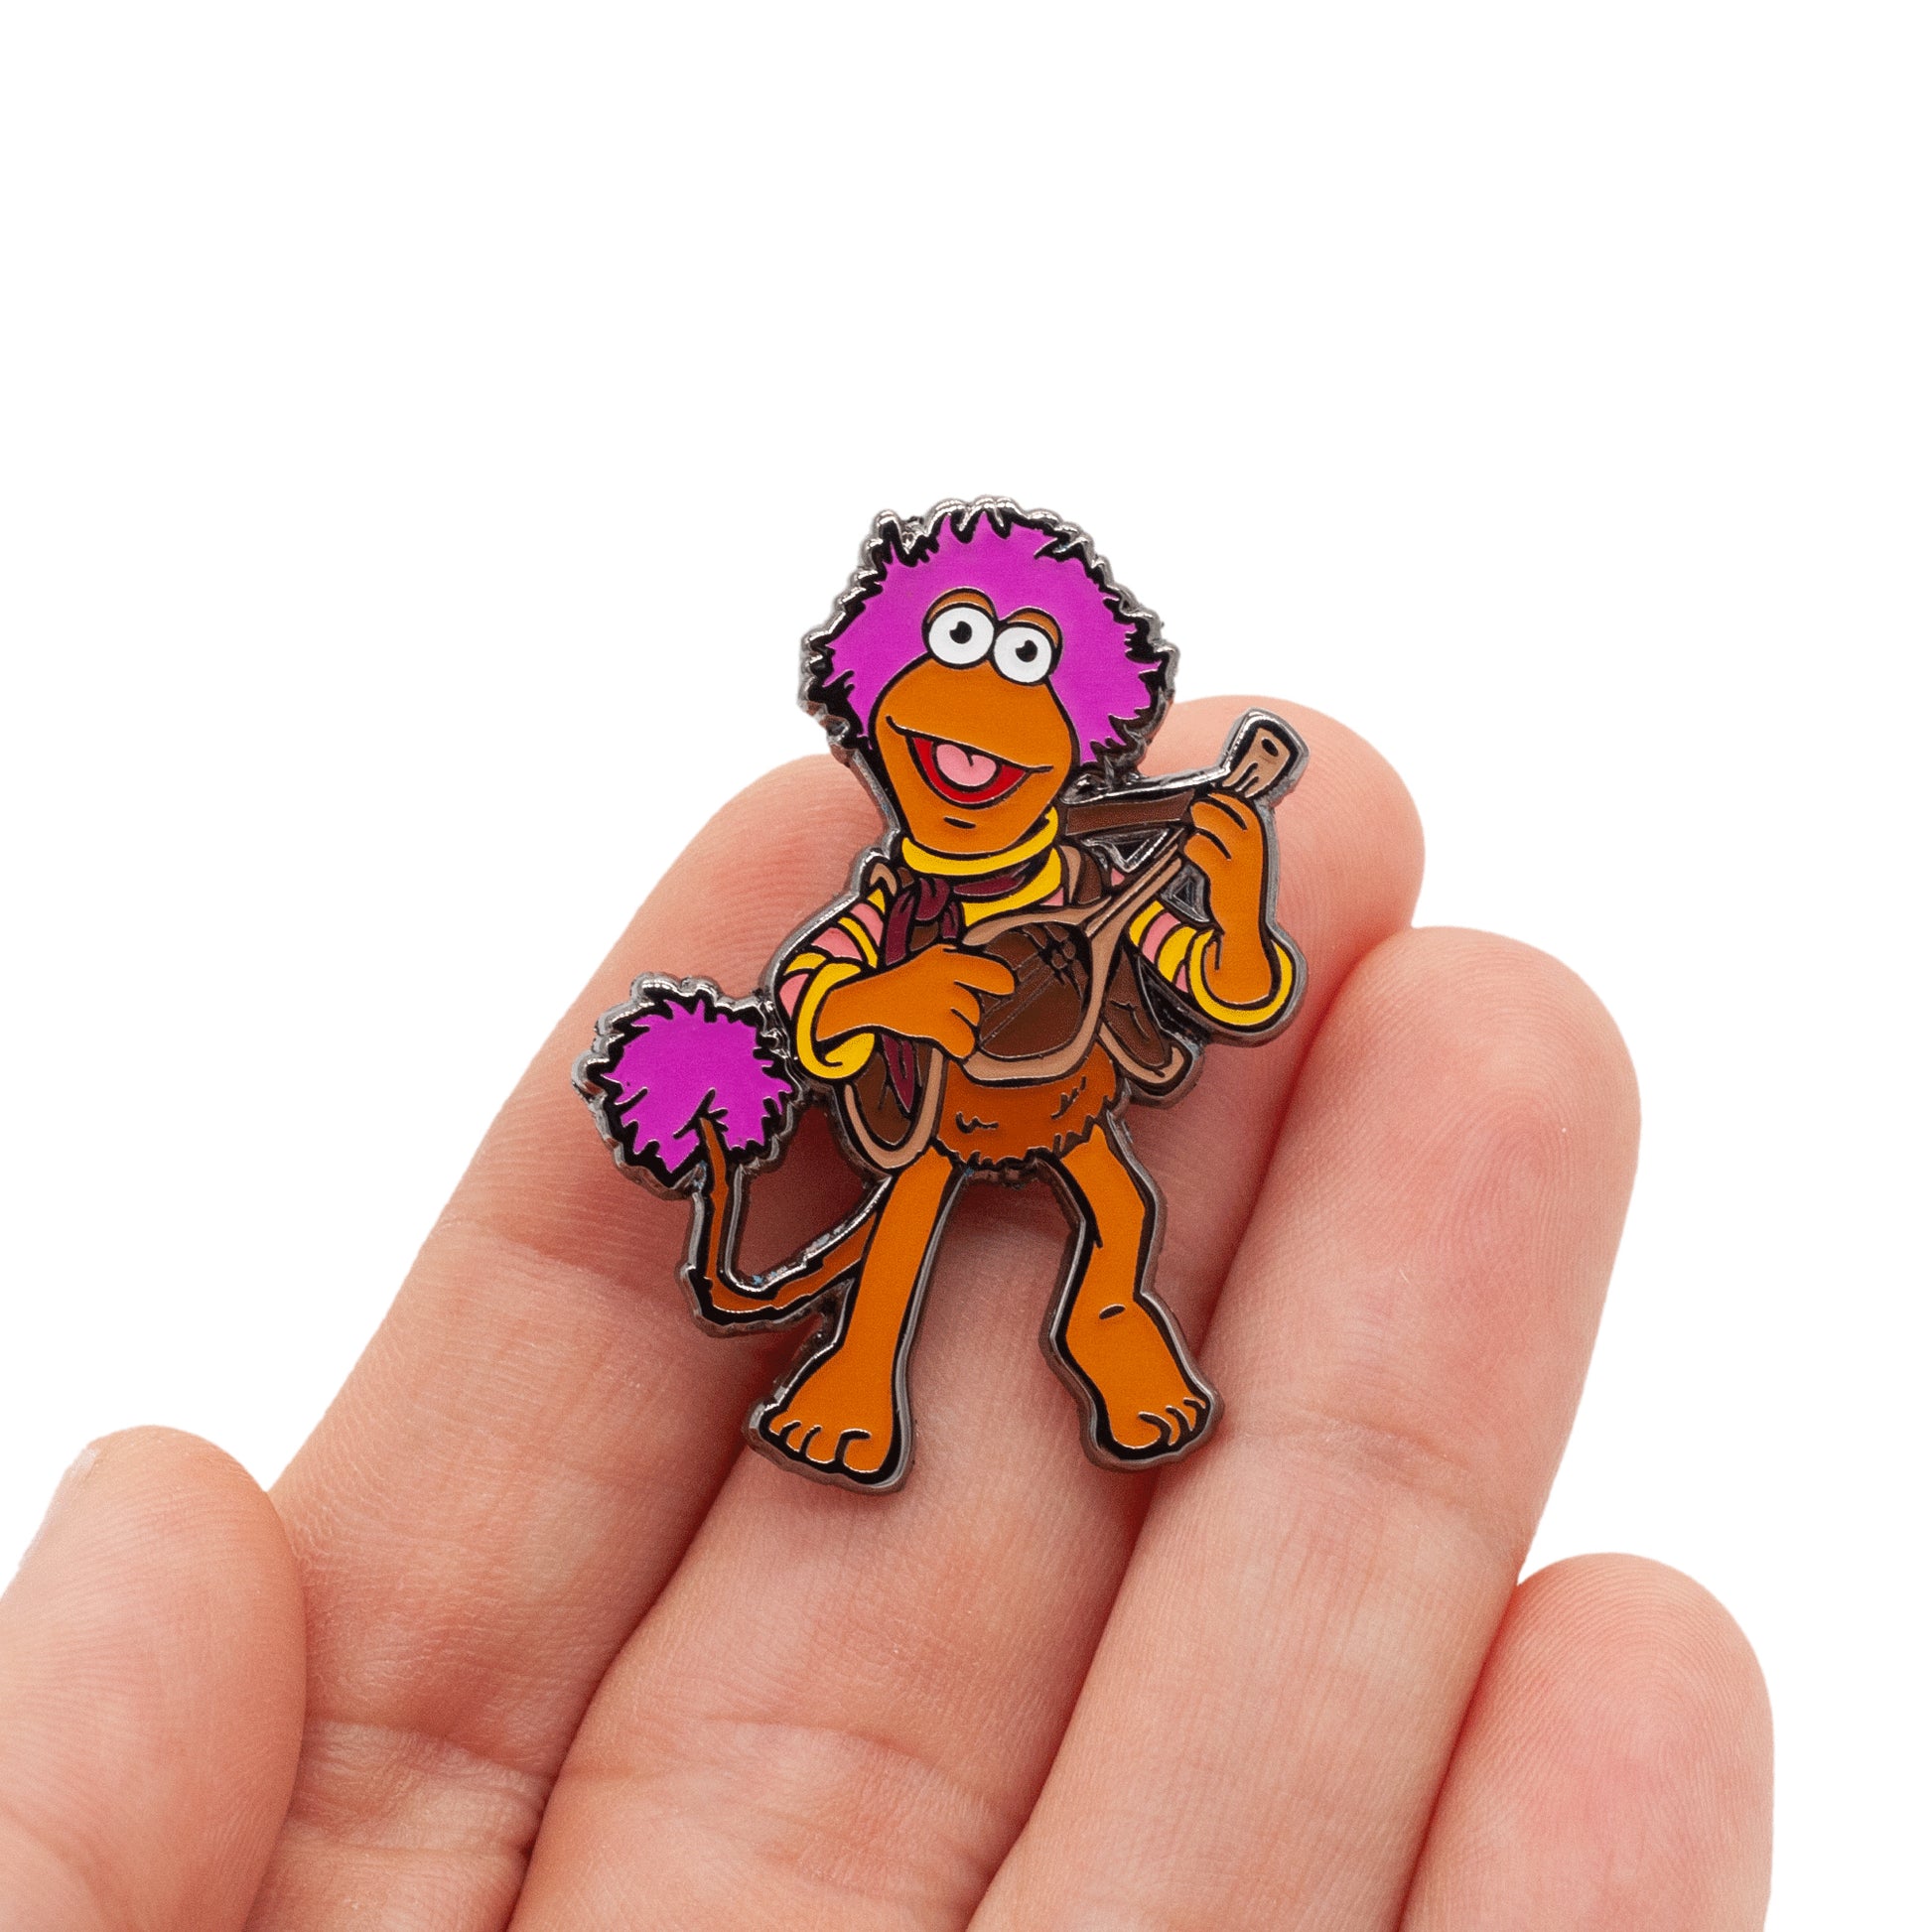 gobo lapel pin, featuring the character of gobo playing his favorite instrument! Pin is being held by a hand, over white background. 